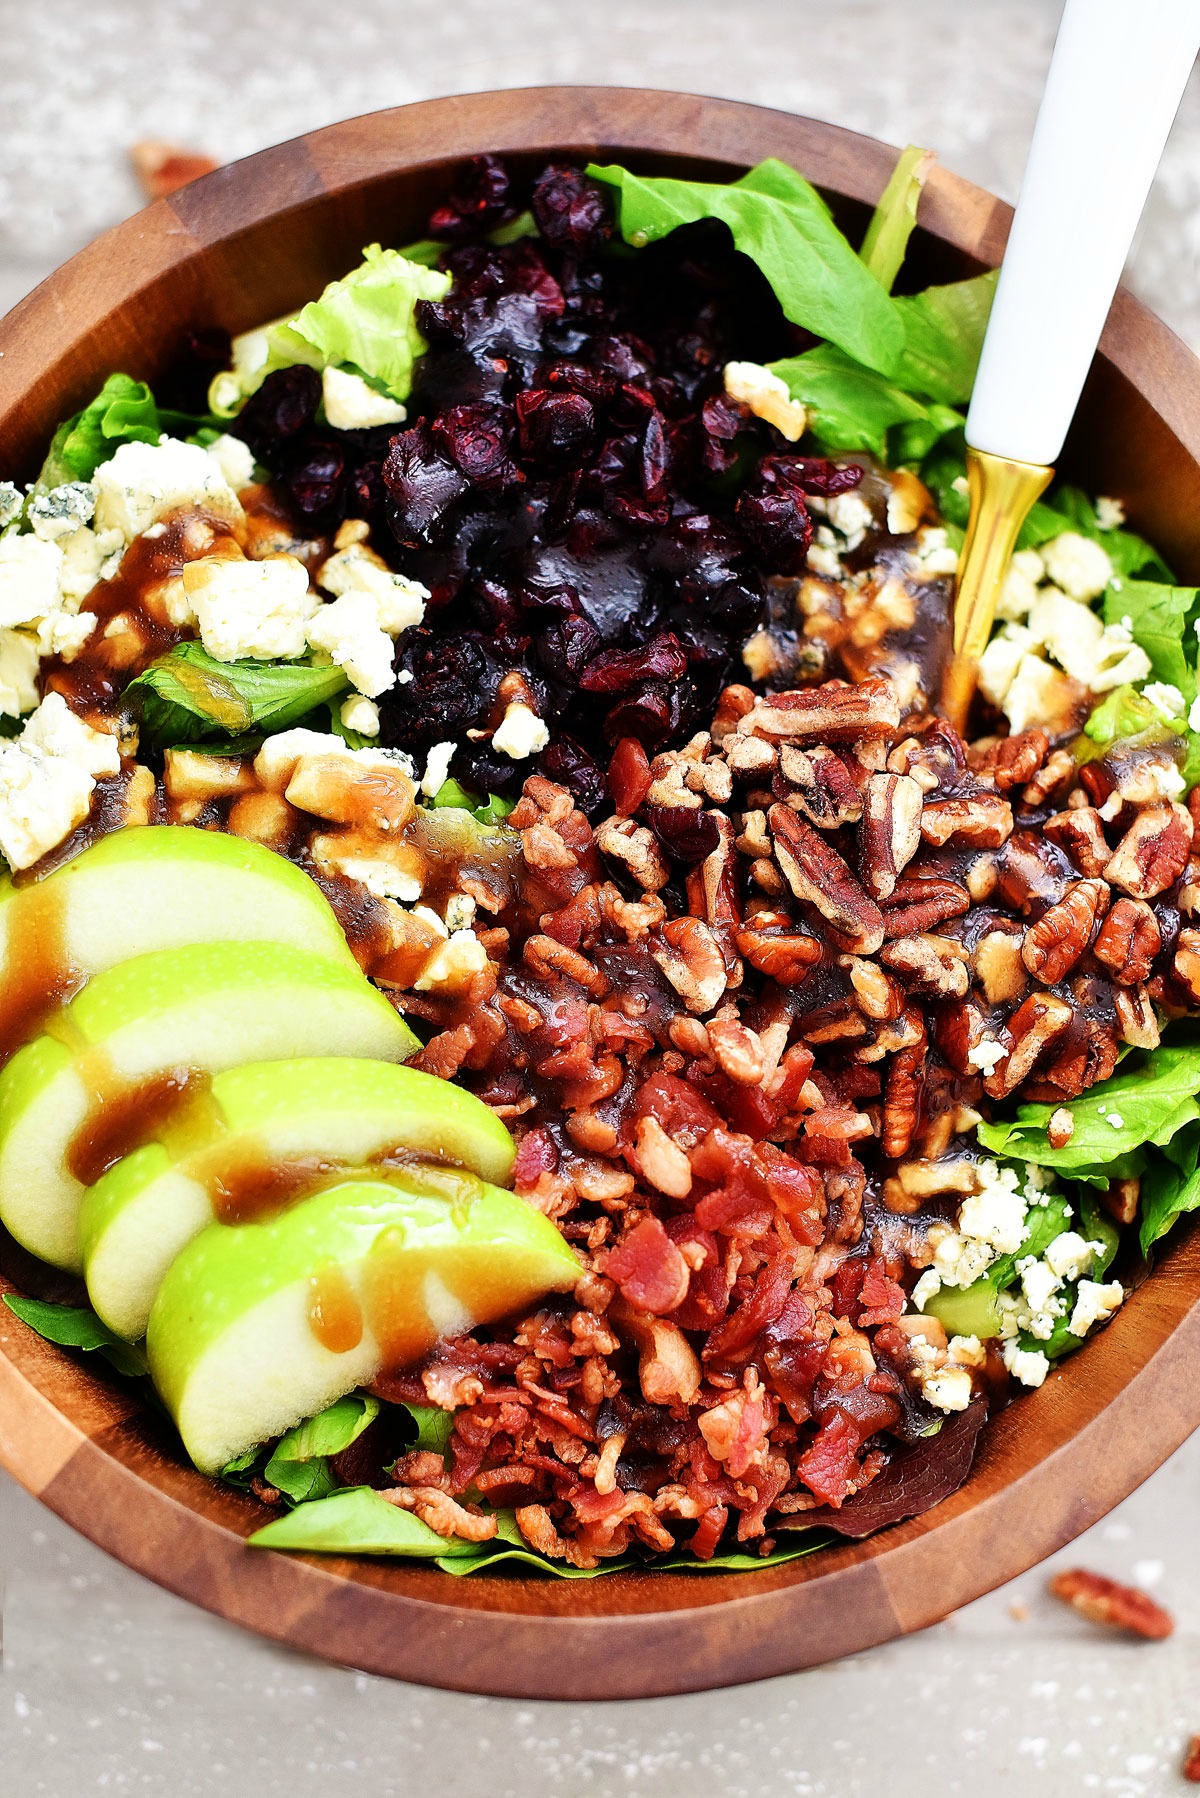 Apple Bacon & Gorgonzola Salad is made with slices of apple, crispy bacon and a creamy balsamic vinaigrette. Life-in-the-Lofthouse.com